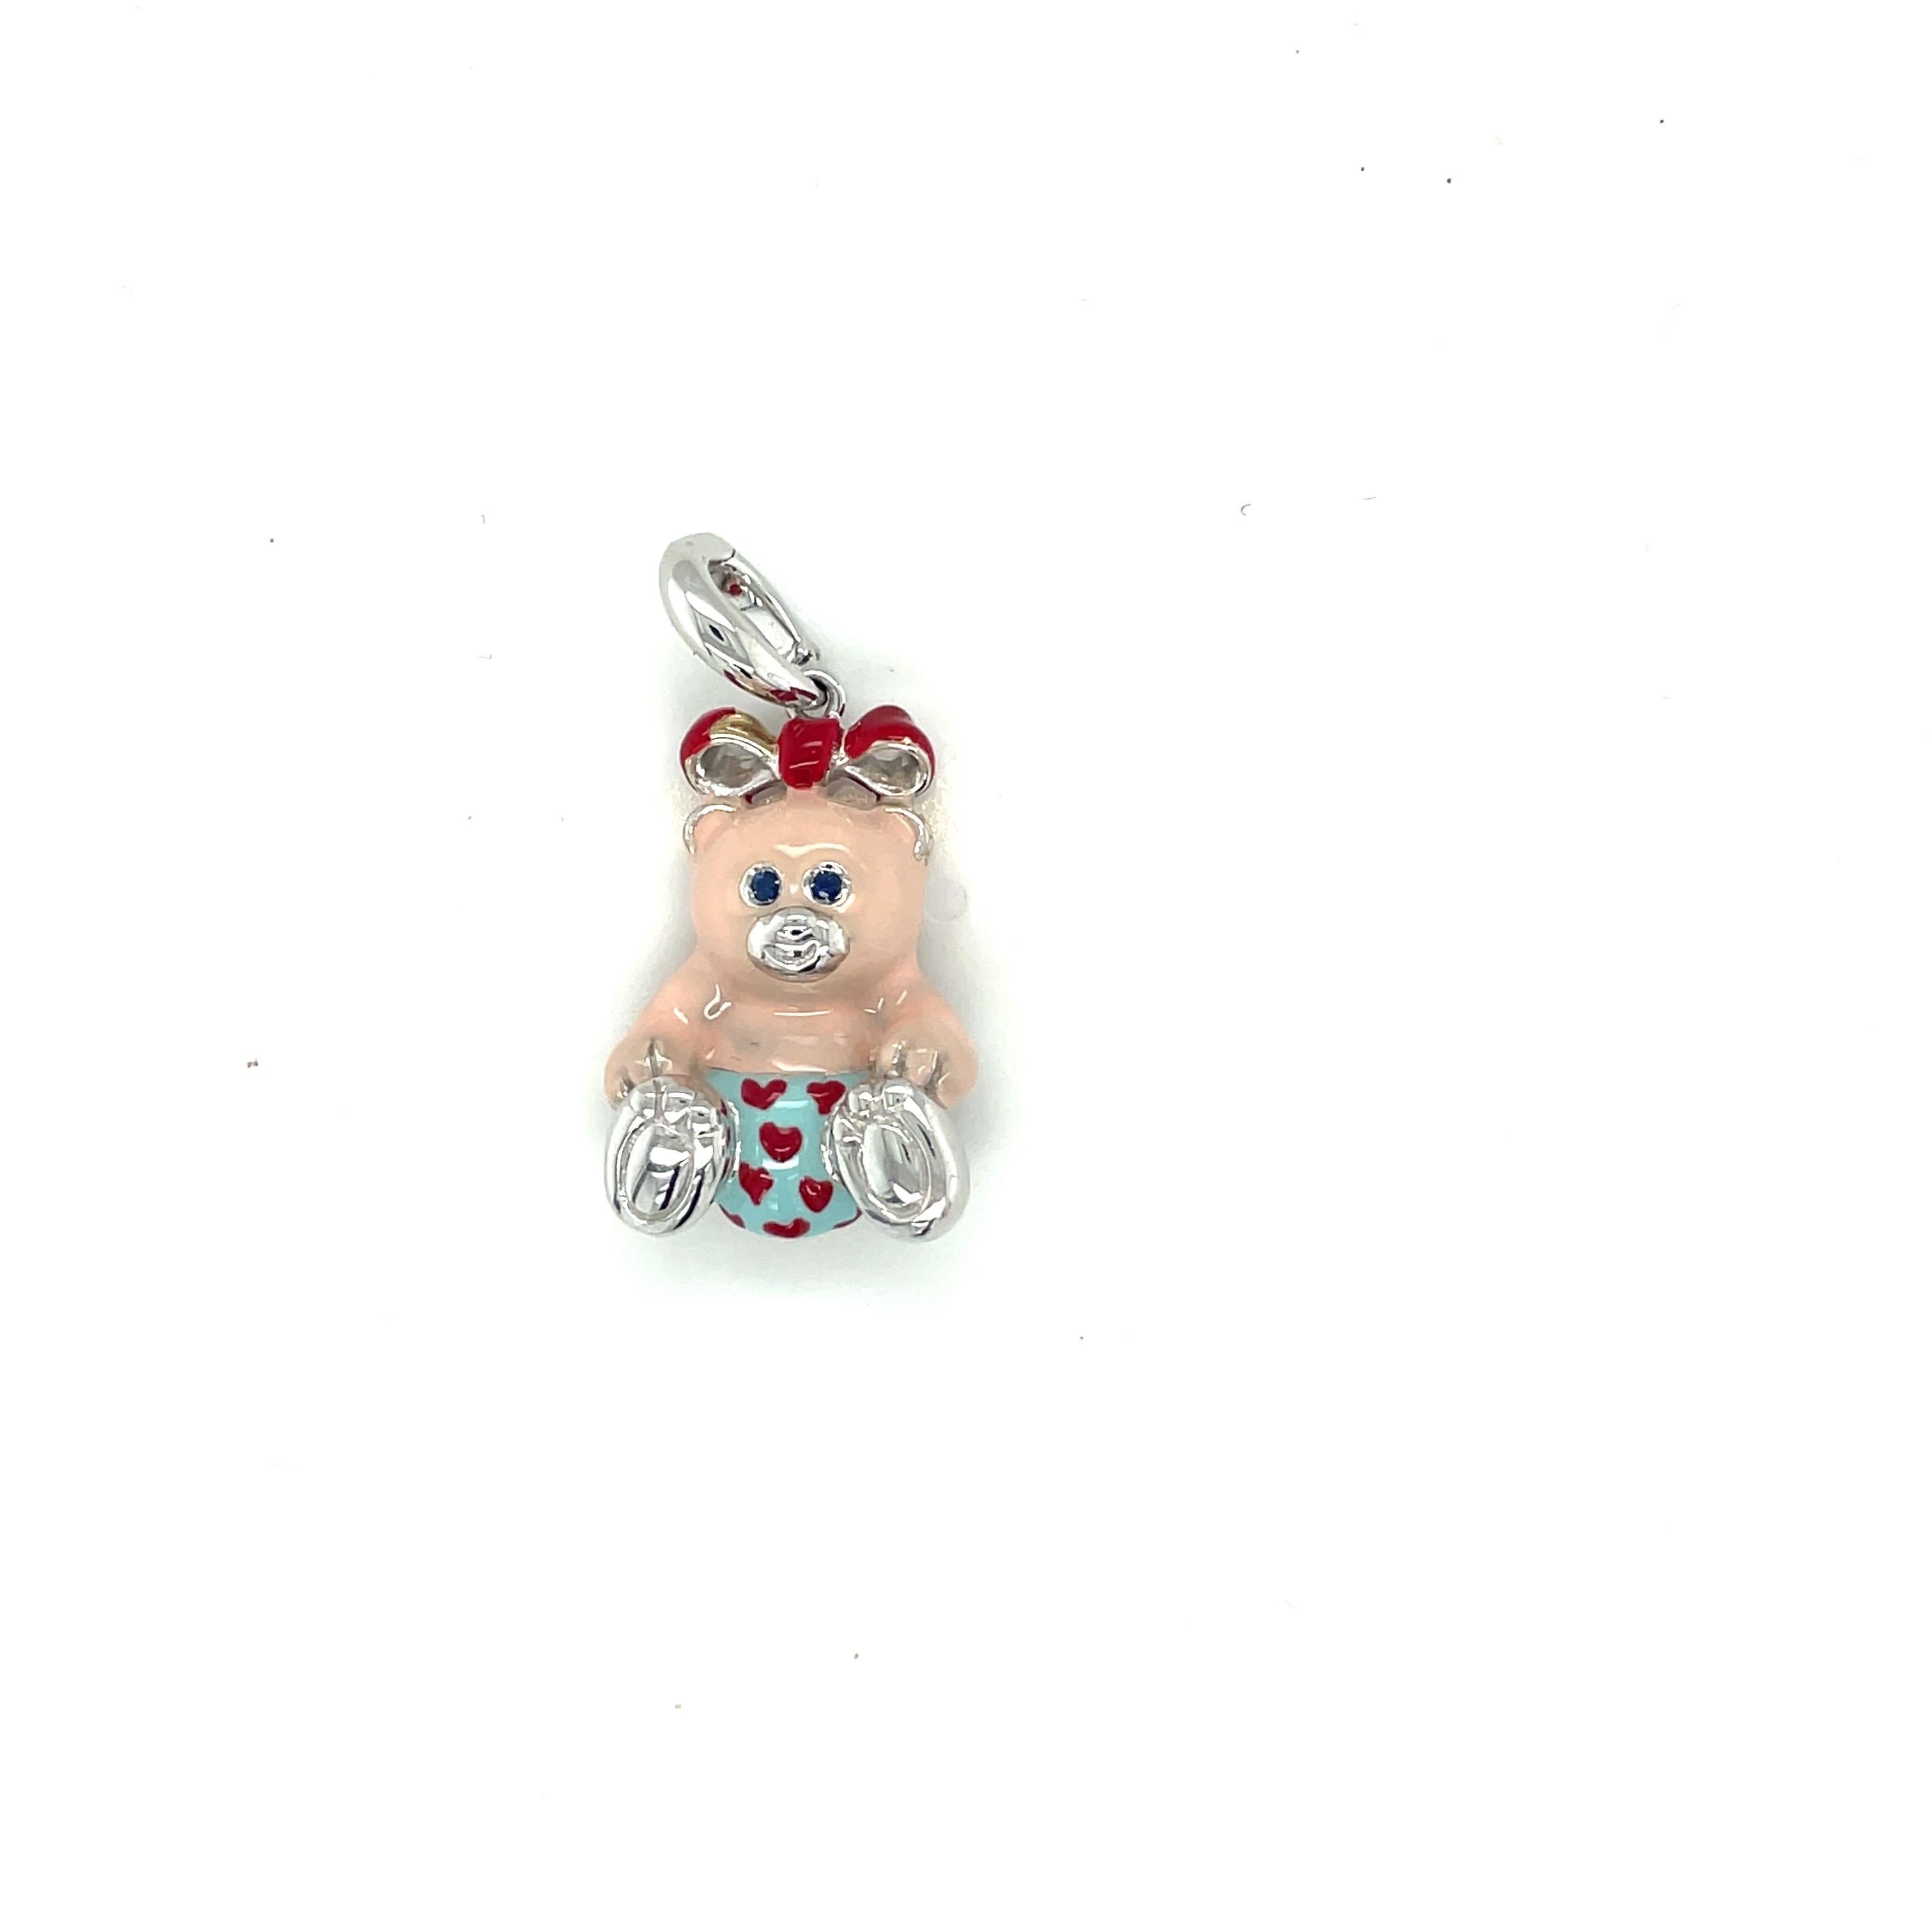 Just the cutest....Teddy bear charm made exclusively for Cellini by Ambrosi of Italy.

This 18 karat white gold teddy bear charm is crafted with a soft pink enamel for the body. Her outfit is light blue with red hearts.. She has a red bow and blue